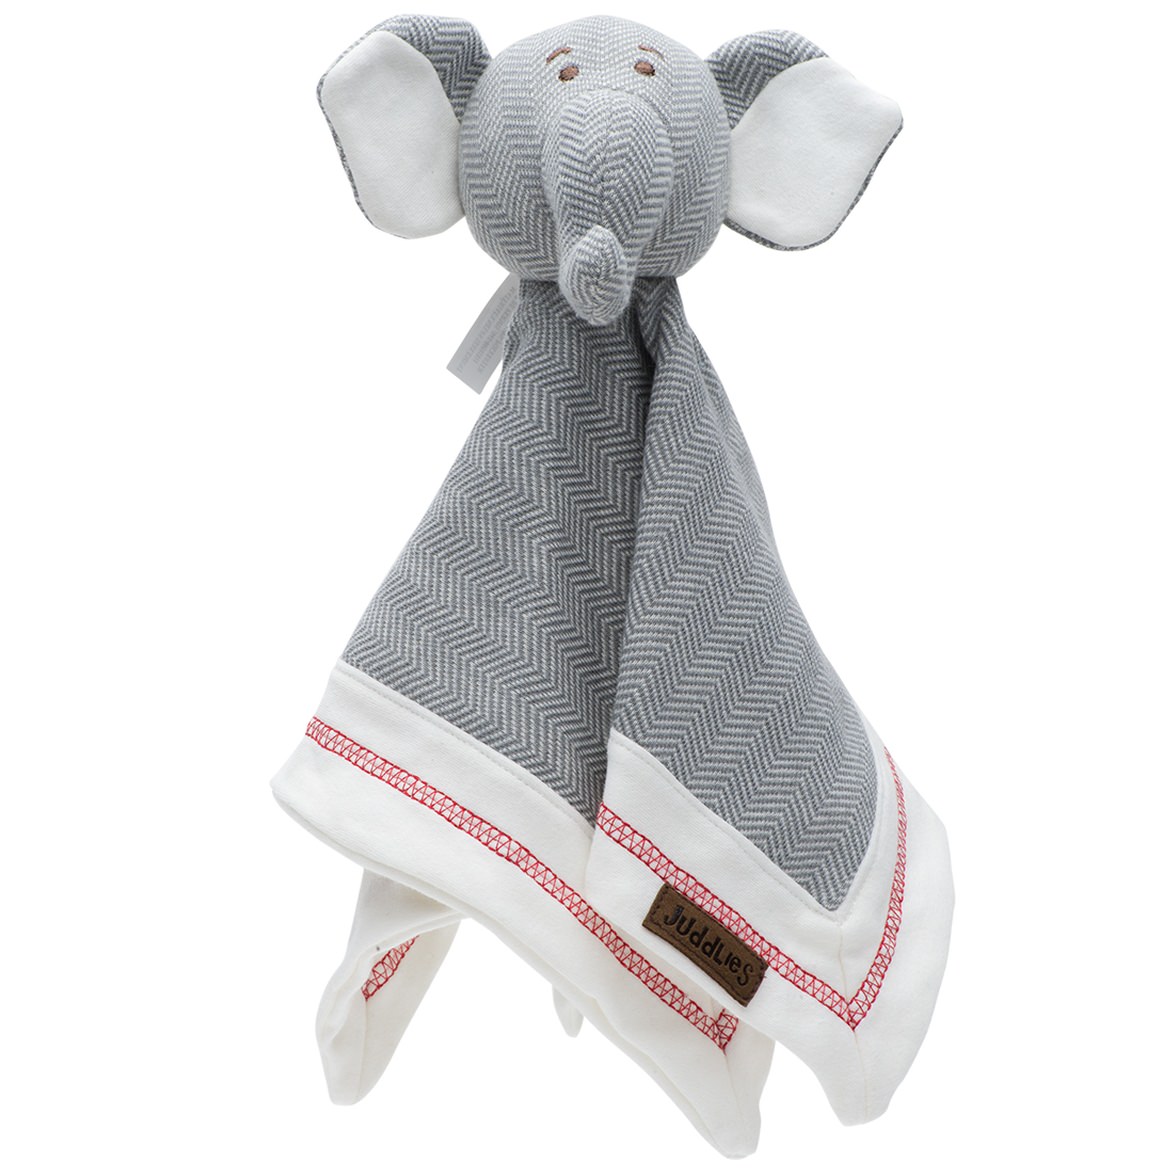 Lovey Lovey Blanket Baby Blanket Security Blanket for Babies Elephant Lovey, Personalized Baby Lovey Lovey for Baby Baby Gift